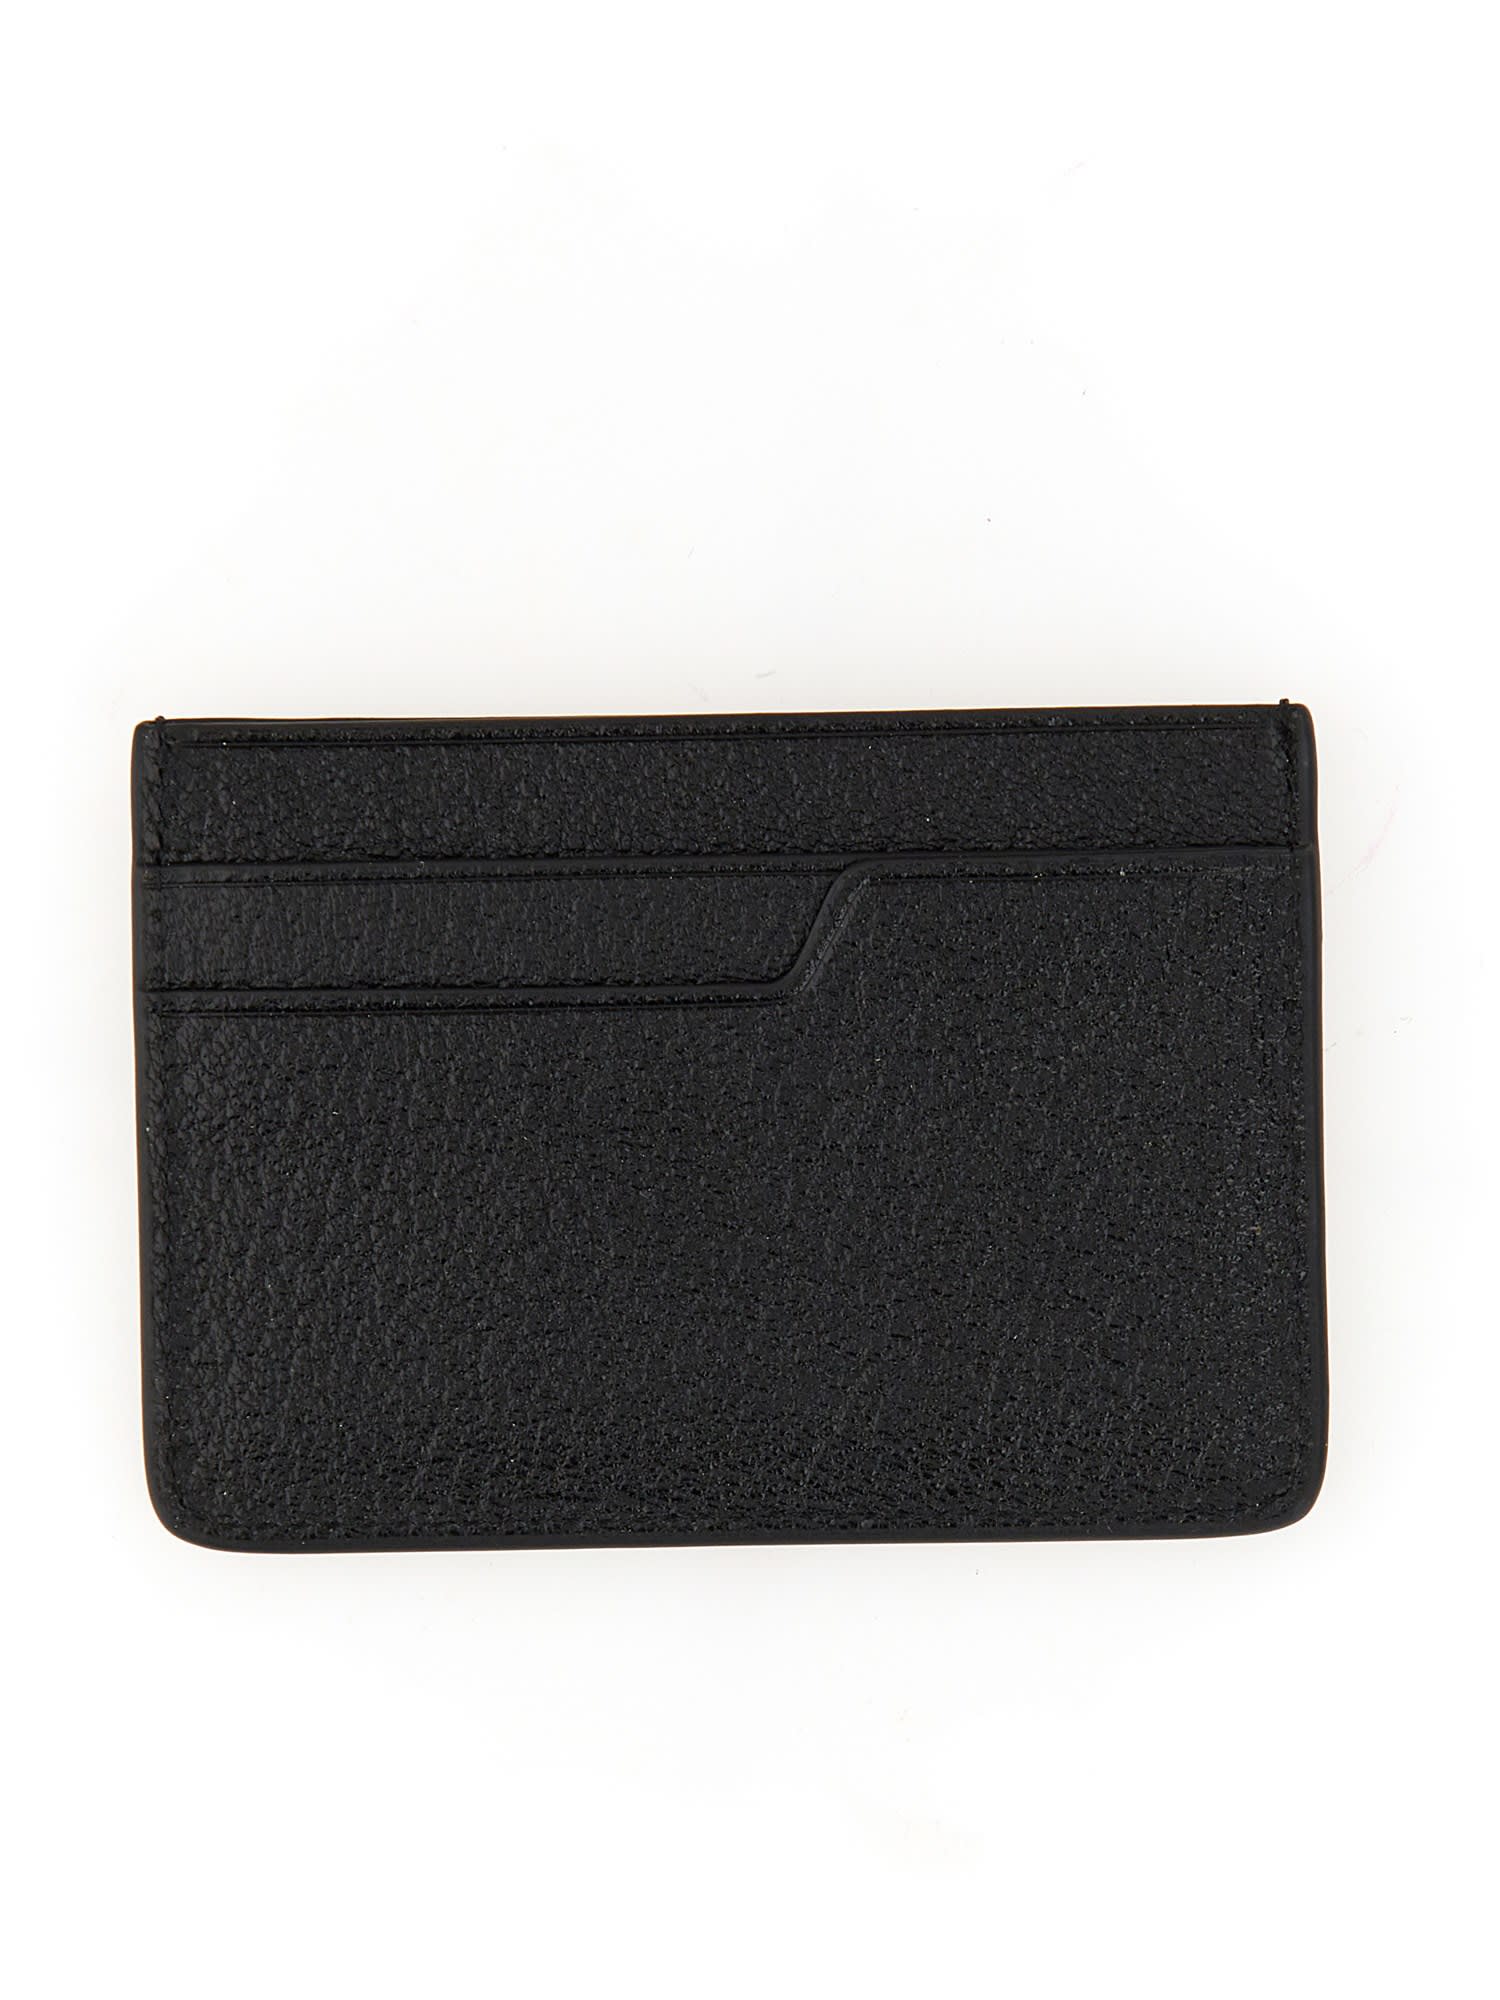 Anya Hindmarch Eyes Card Case In Grained Leather